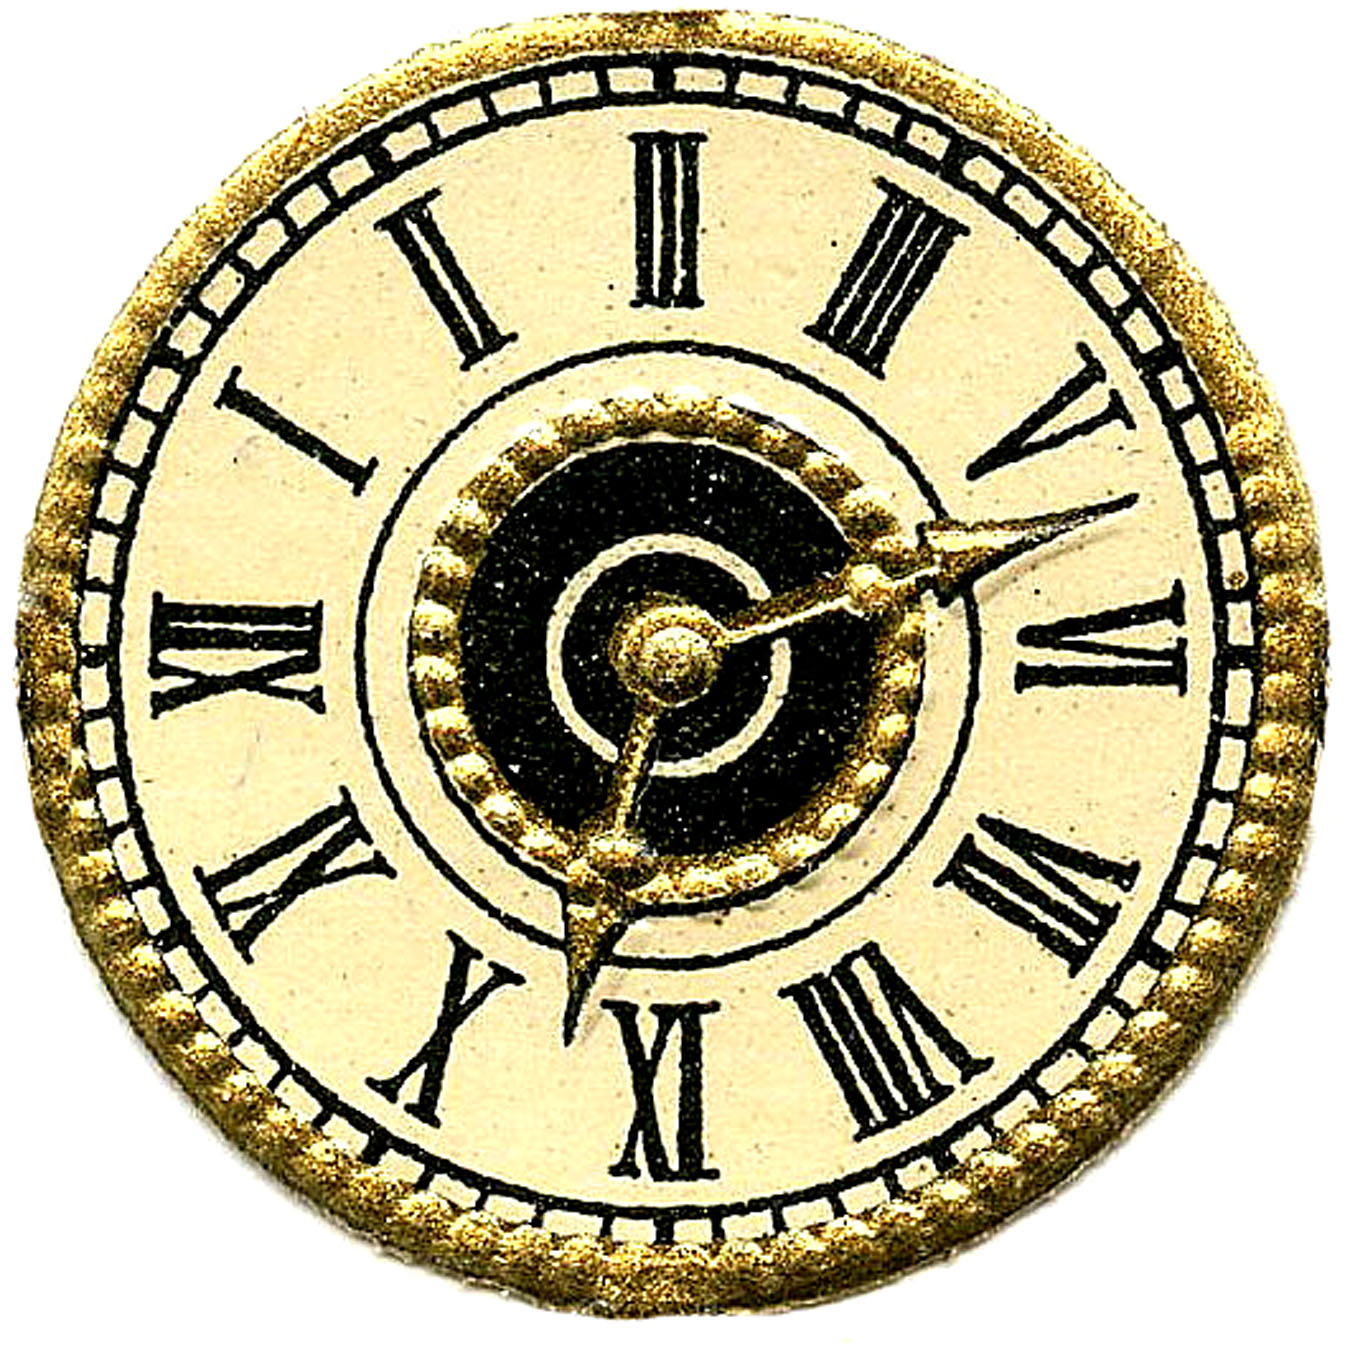 free clipart images clock face - photo #47